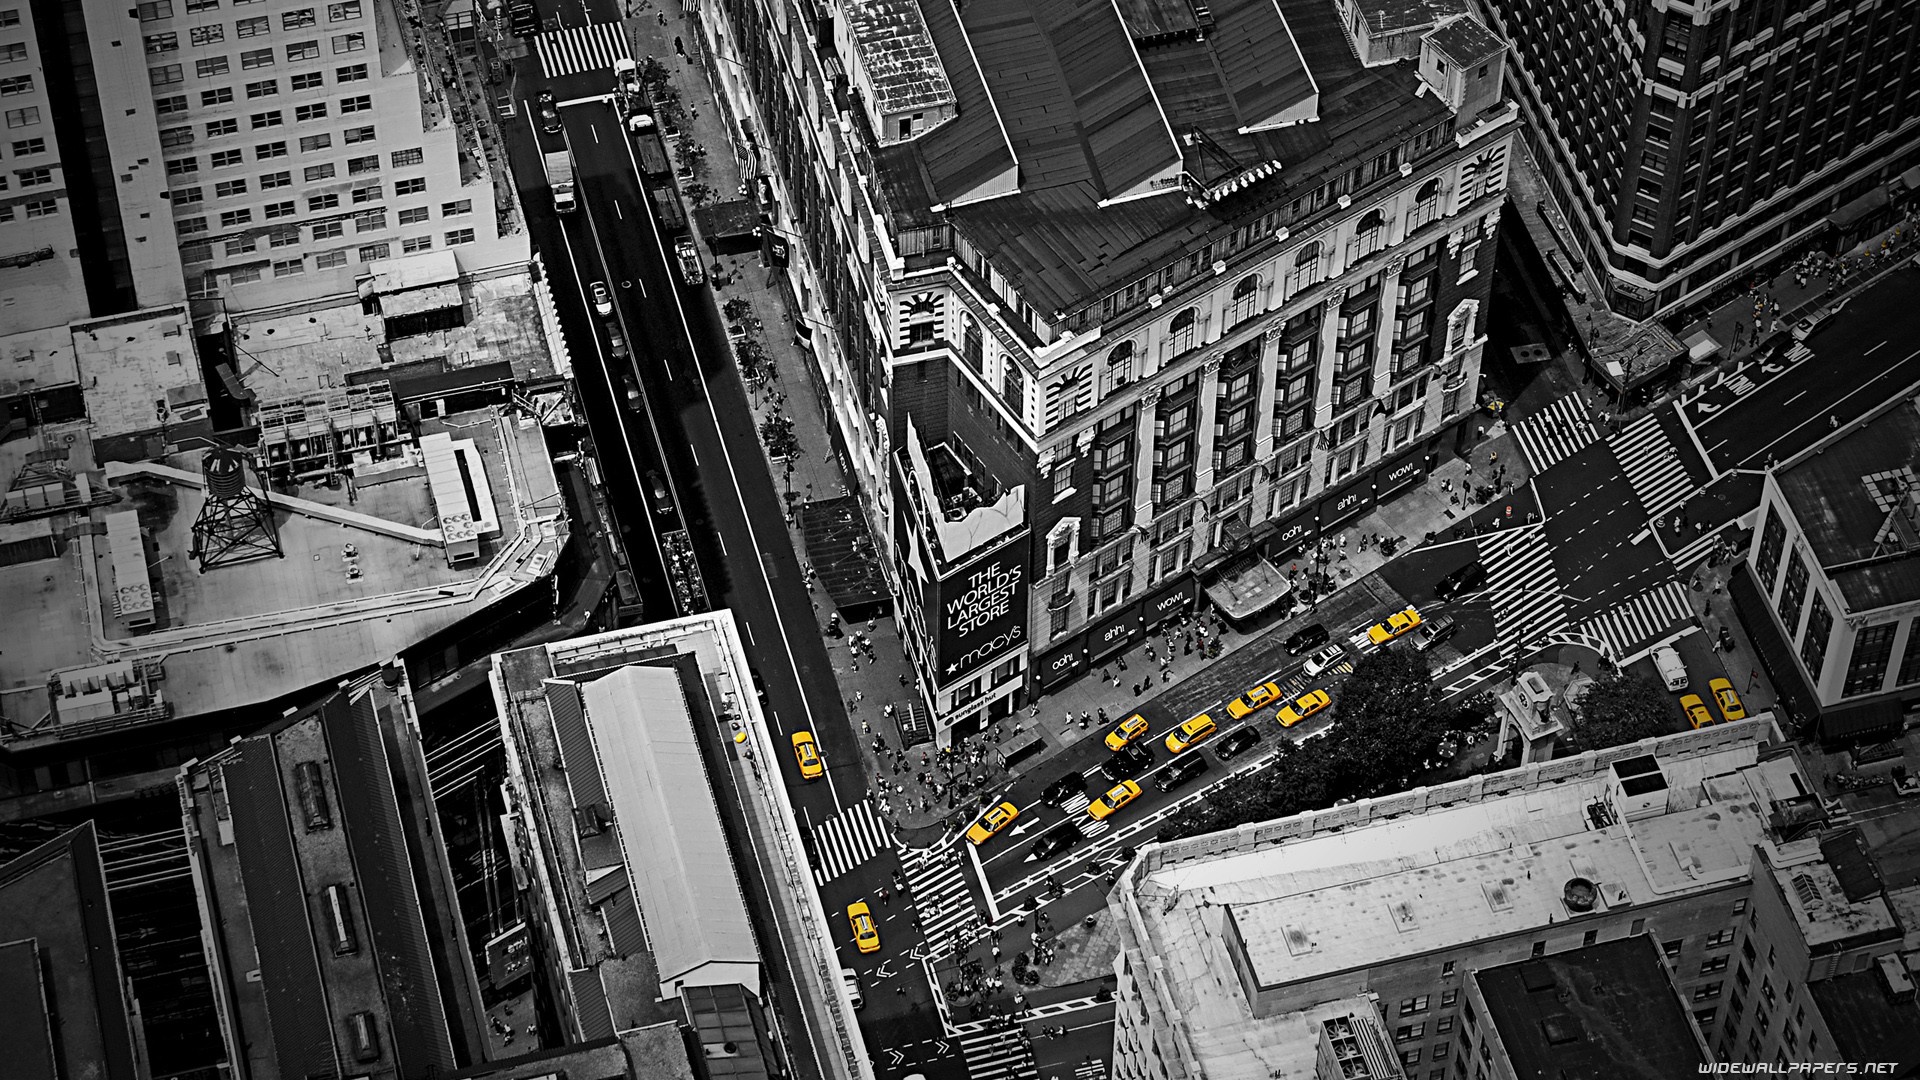 architecture, Building, City, Cityscape, New York City, USA, Birds Eye View, Selective Coloring, Street, Car, Urban, Taxi, Rooftops, Crowds, Road Wallpaper